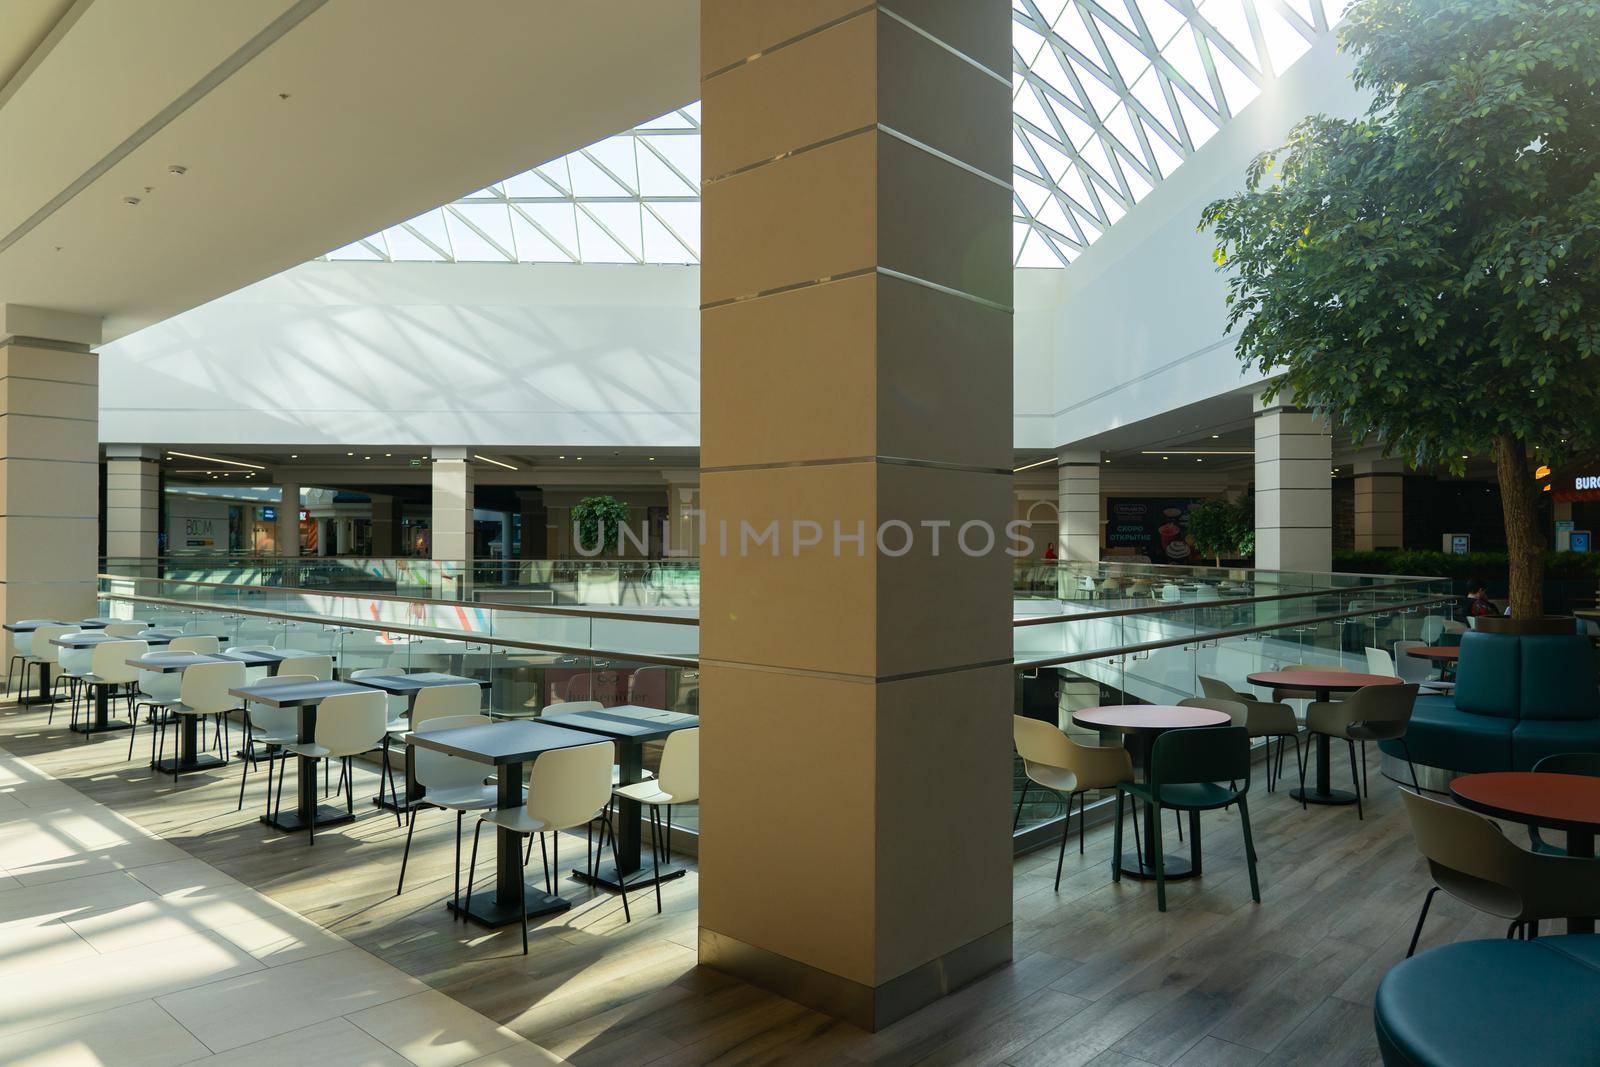 Grodno, Belarus - April 07, 2021: A row of tables with white chairs for visitors to the food court of a modern shopping center Triniti. People admire the beautiful view during the meal.